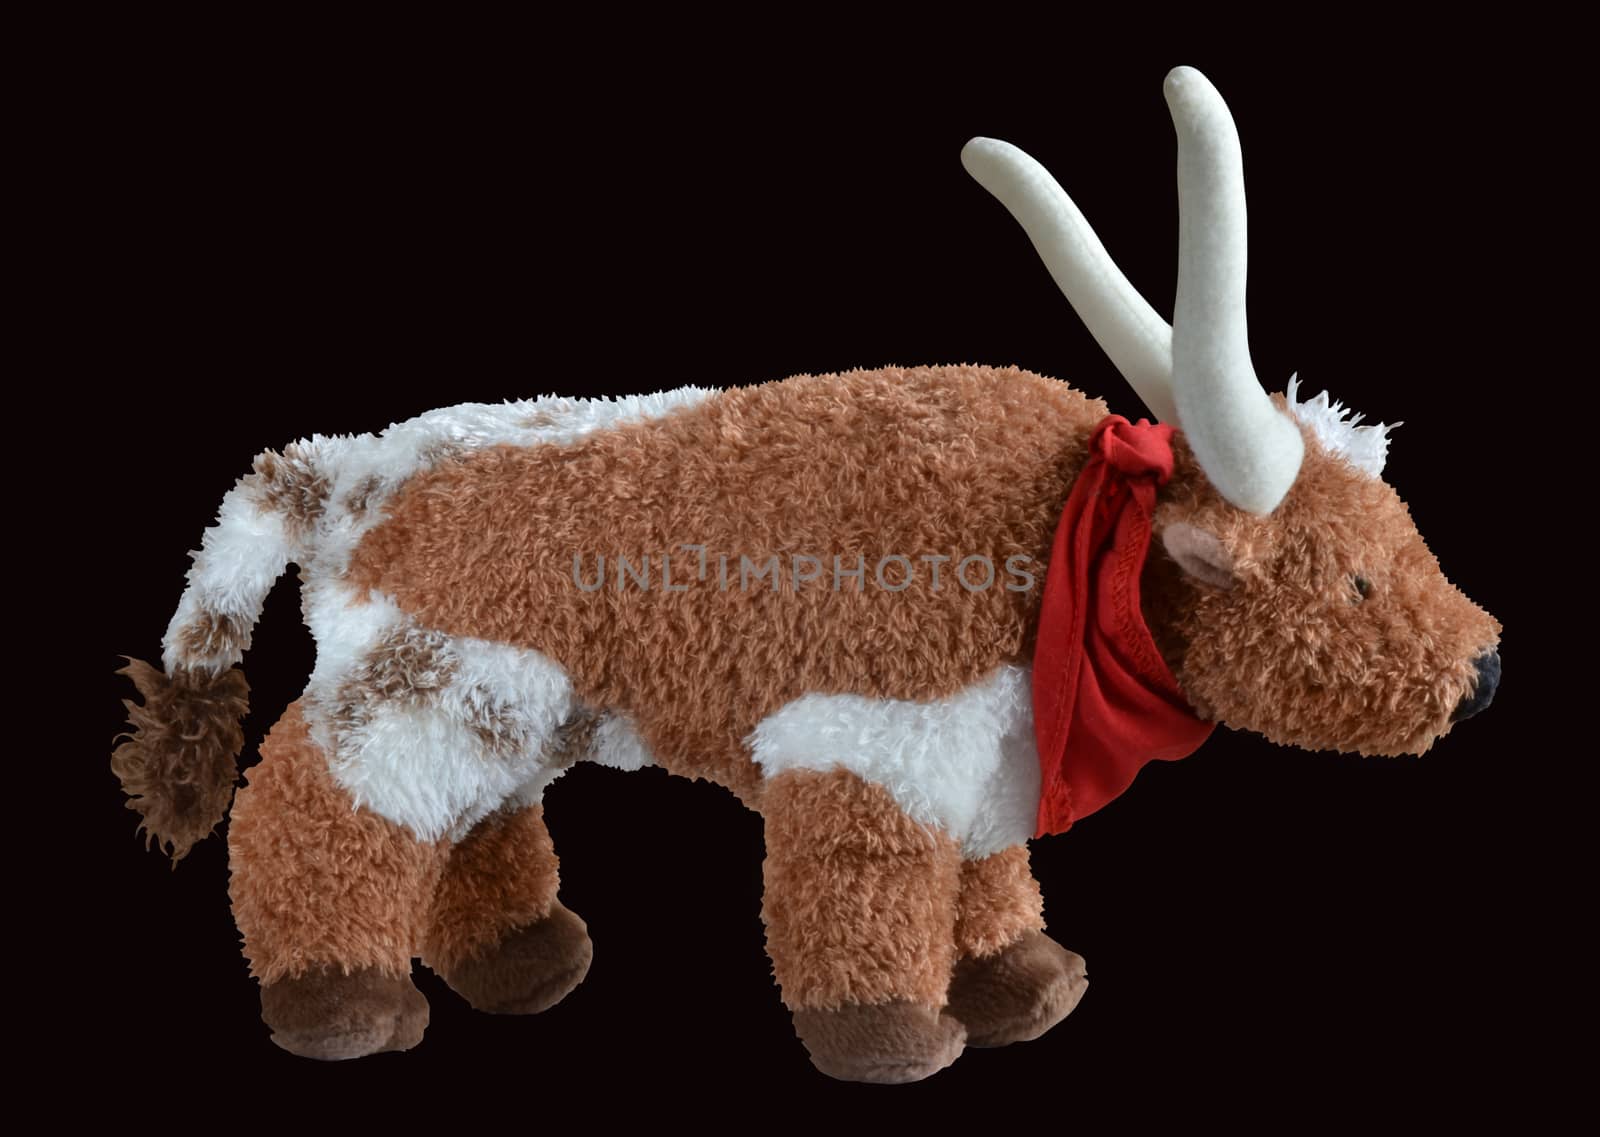 Bull toy by Vectorex